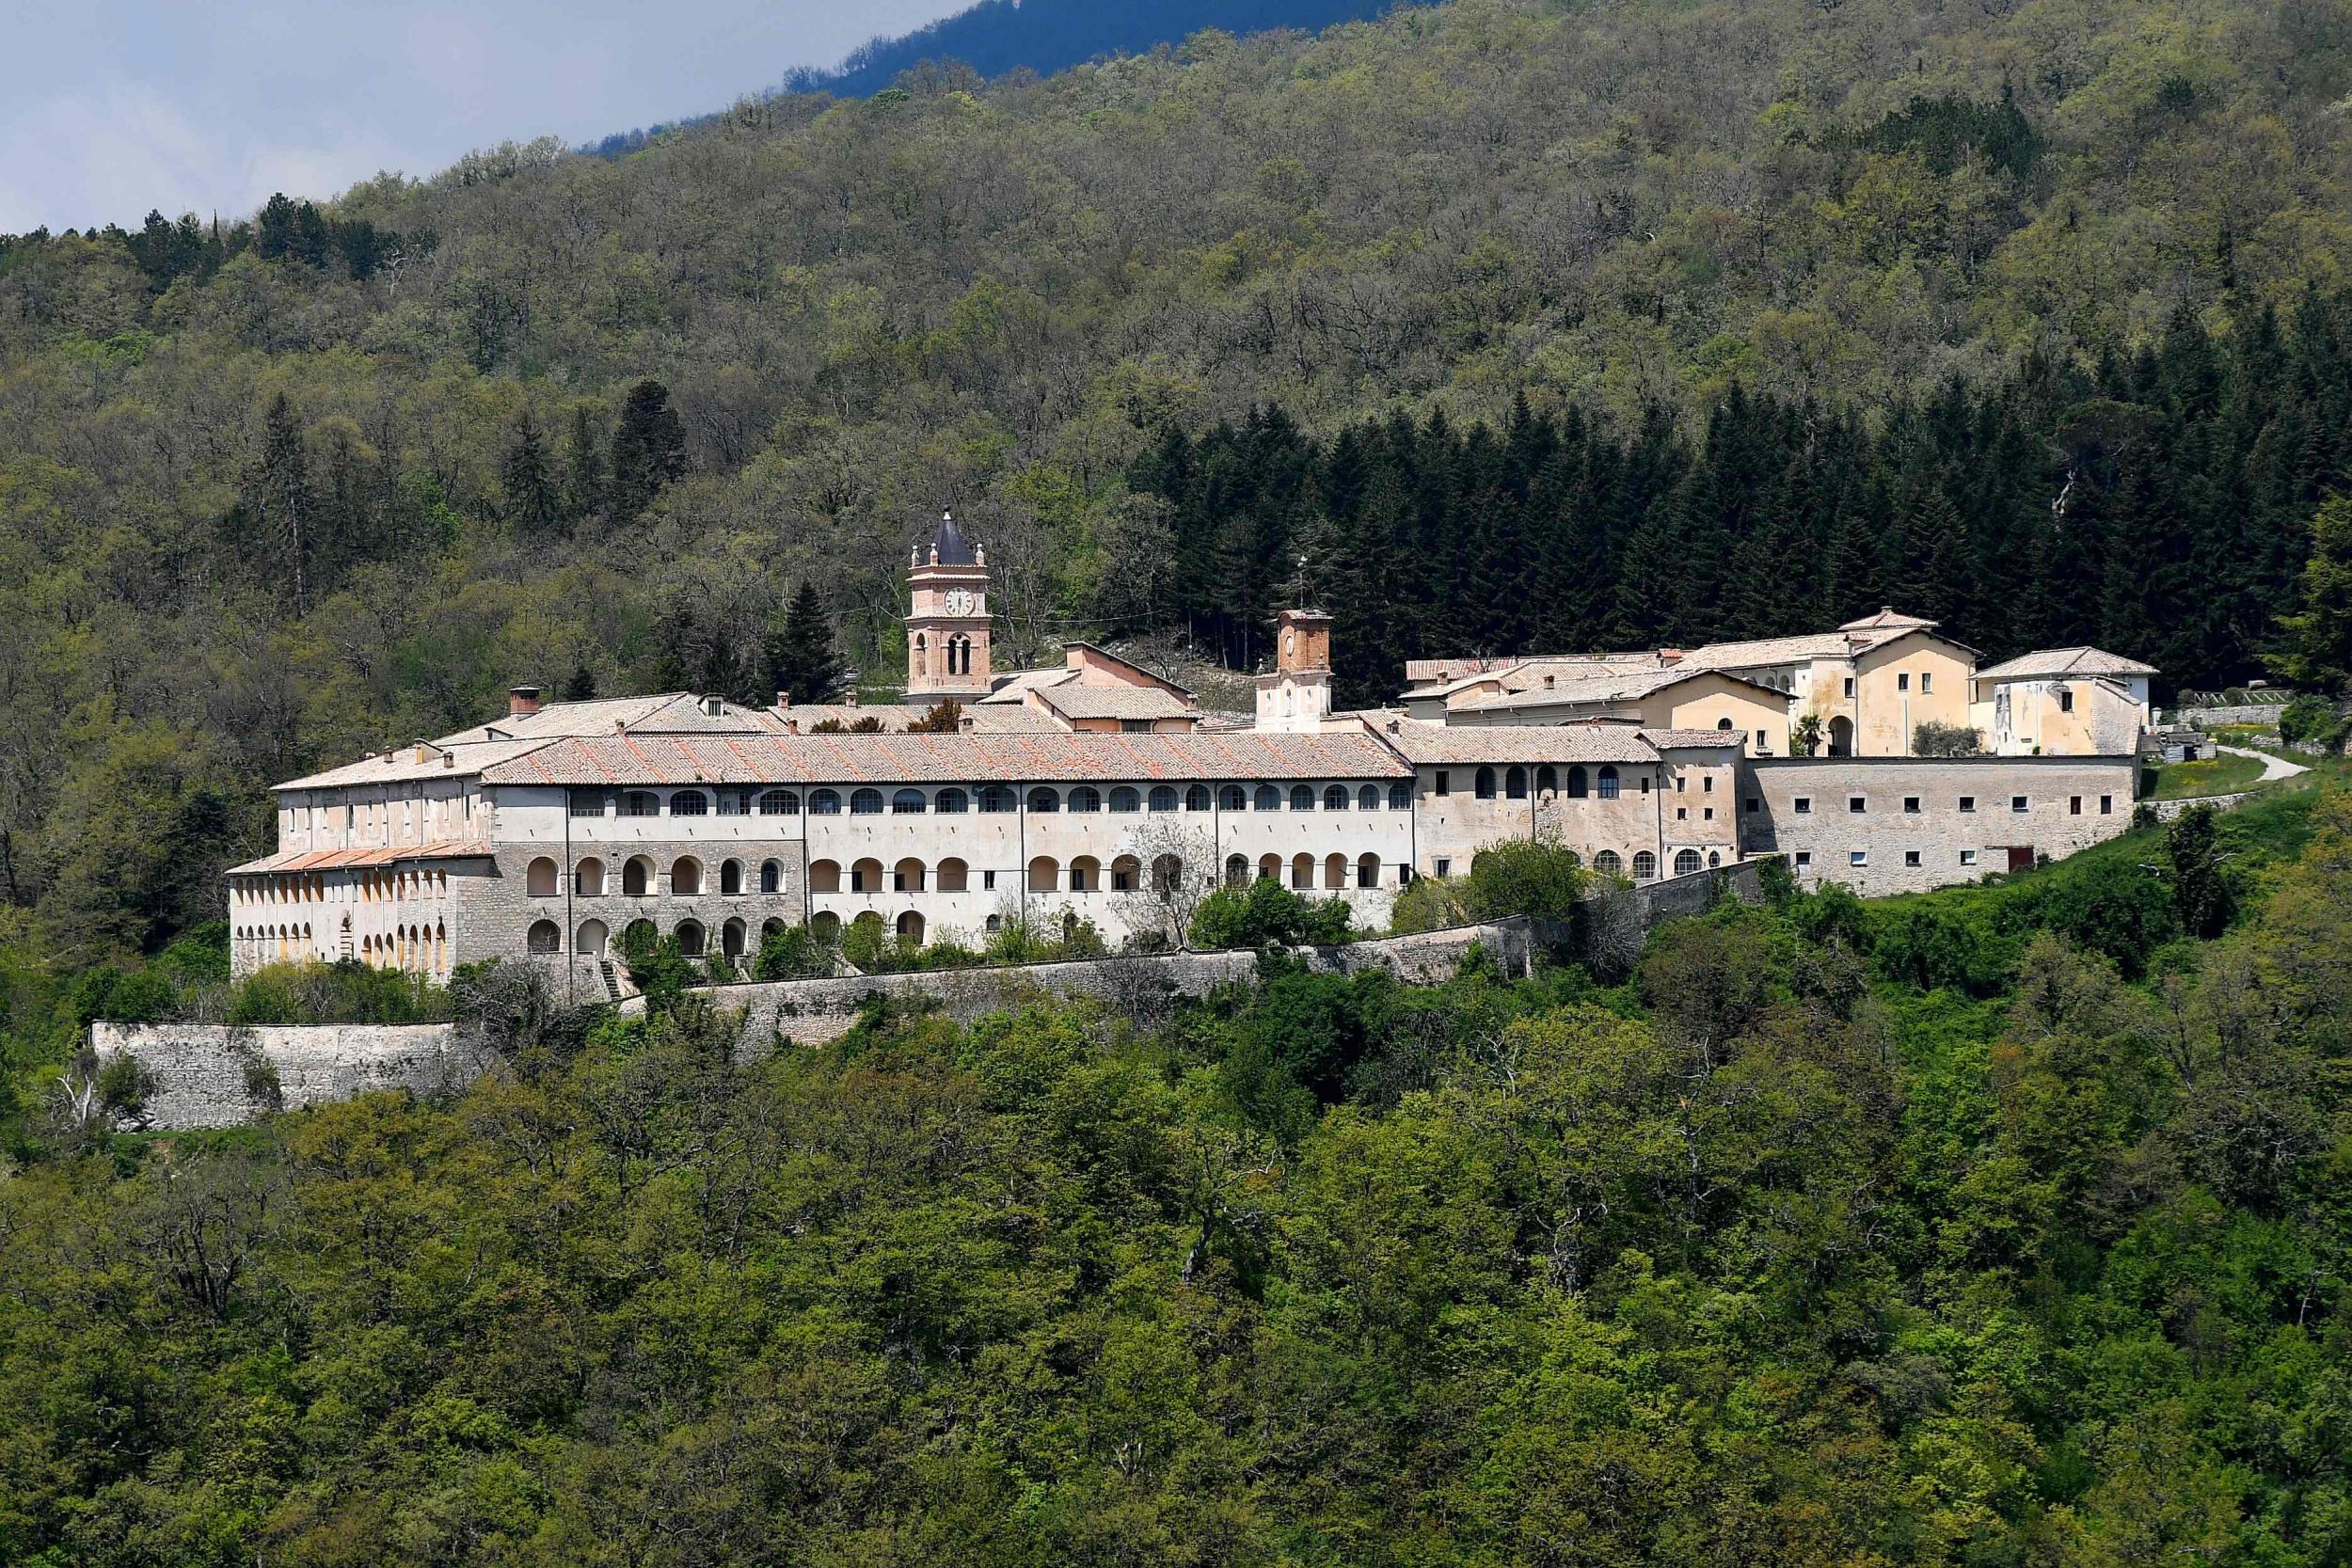 The Trisulti Monastery Certosa di Trisulti in Collepardo, where the far-right training camp is being established